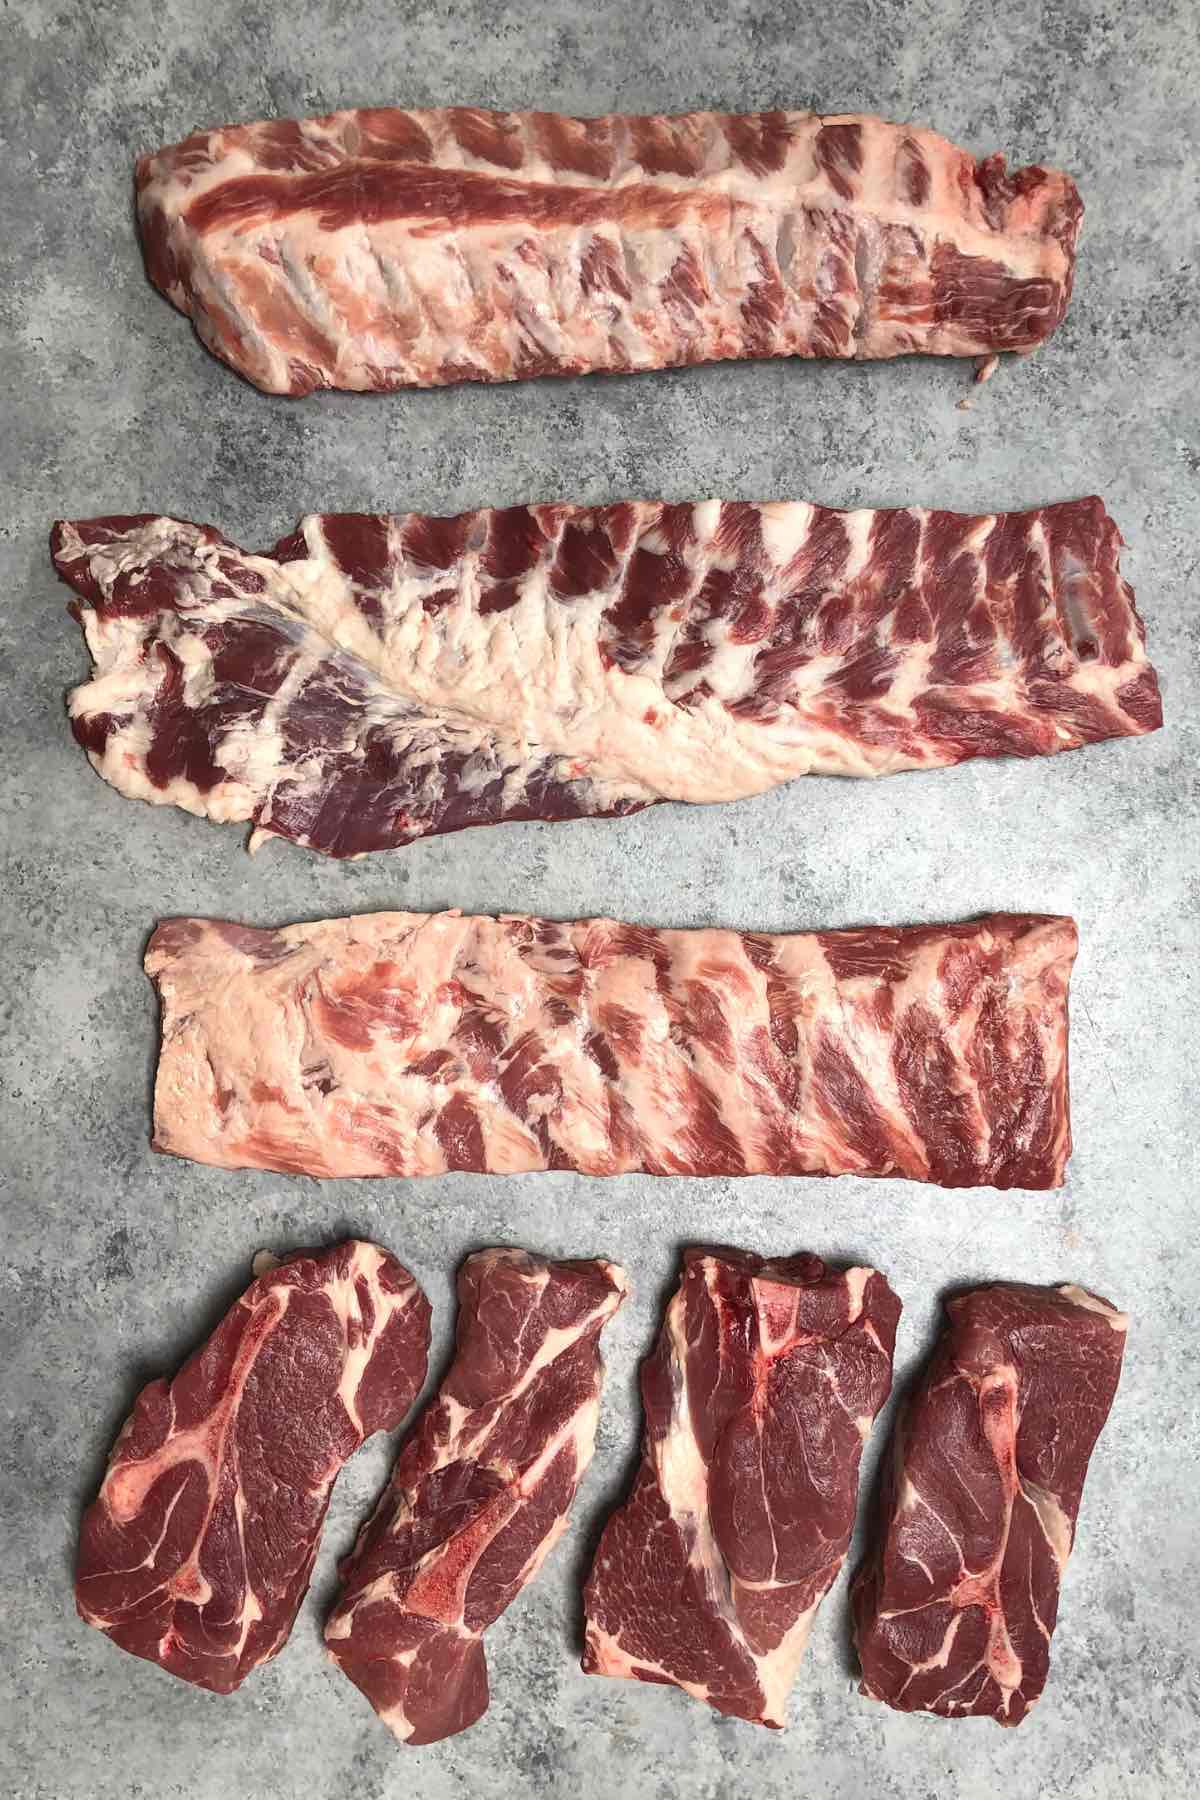 Types of pork ribs: back ribs, spare ribs St Louis ribs and country-style ribs